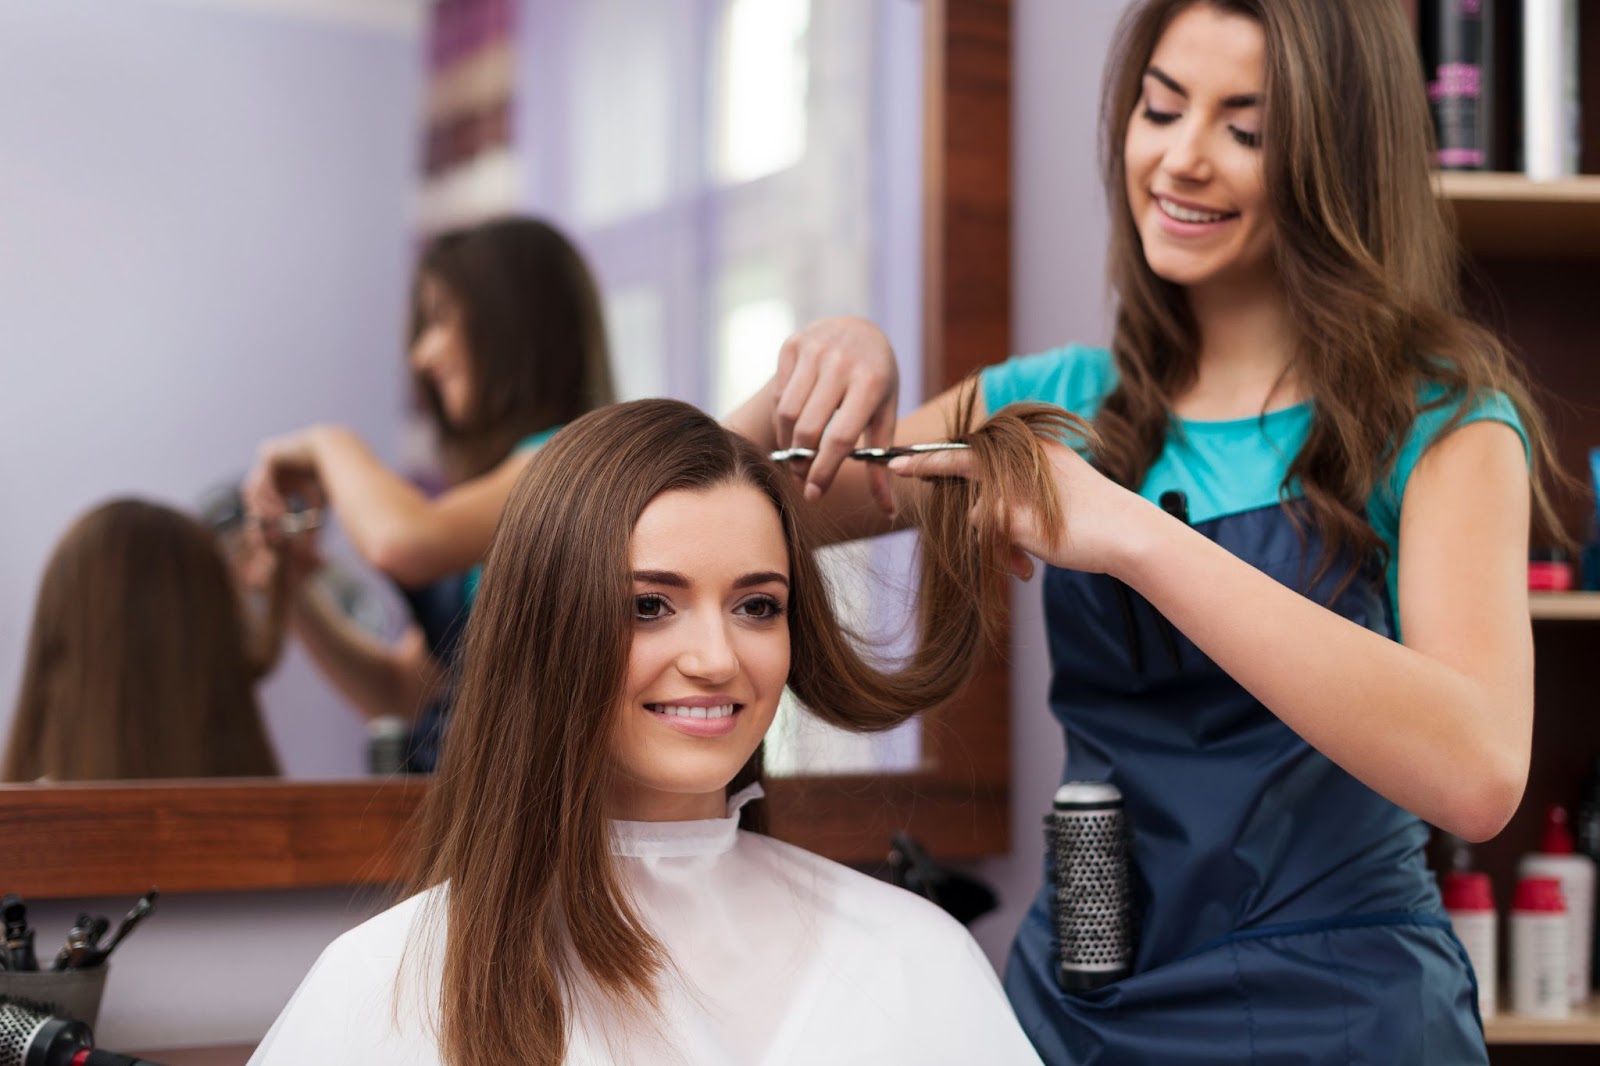 DIY or Salon Pros and Cons of Ladies Haircut